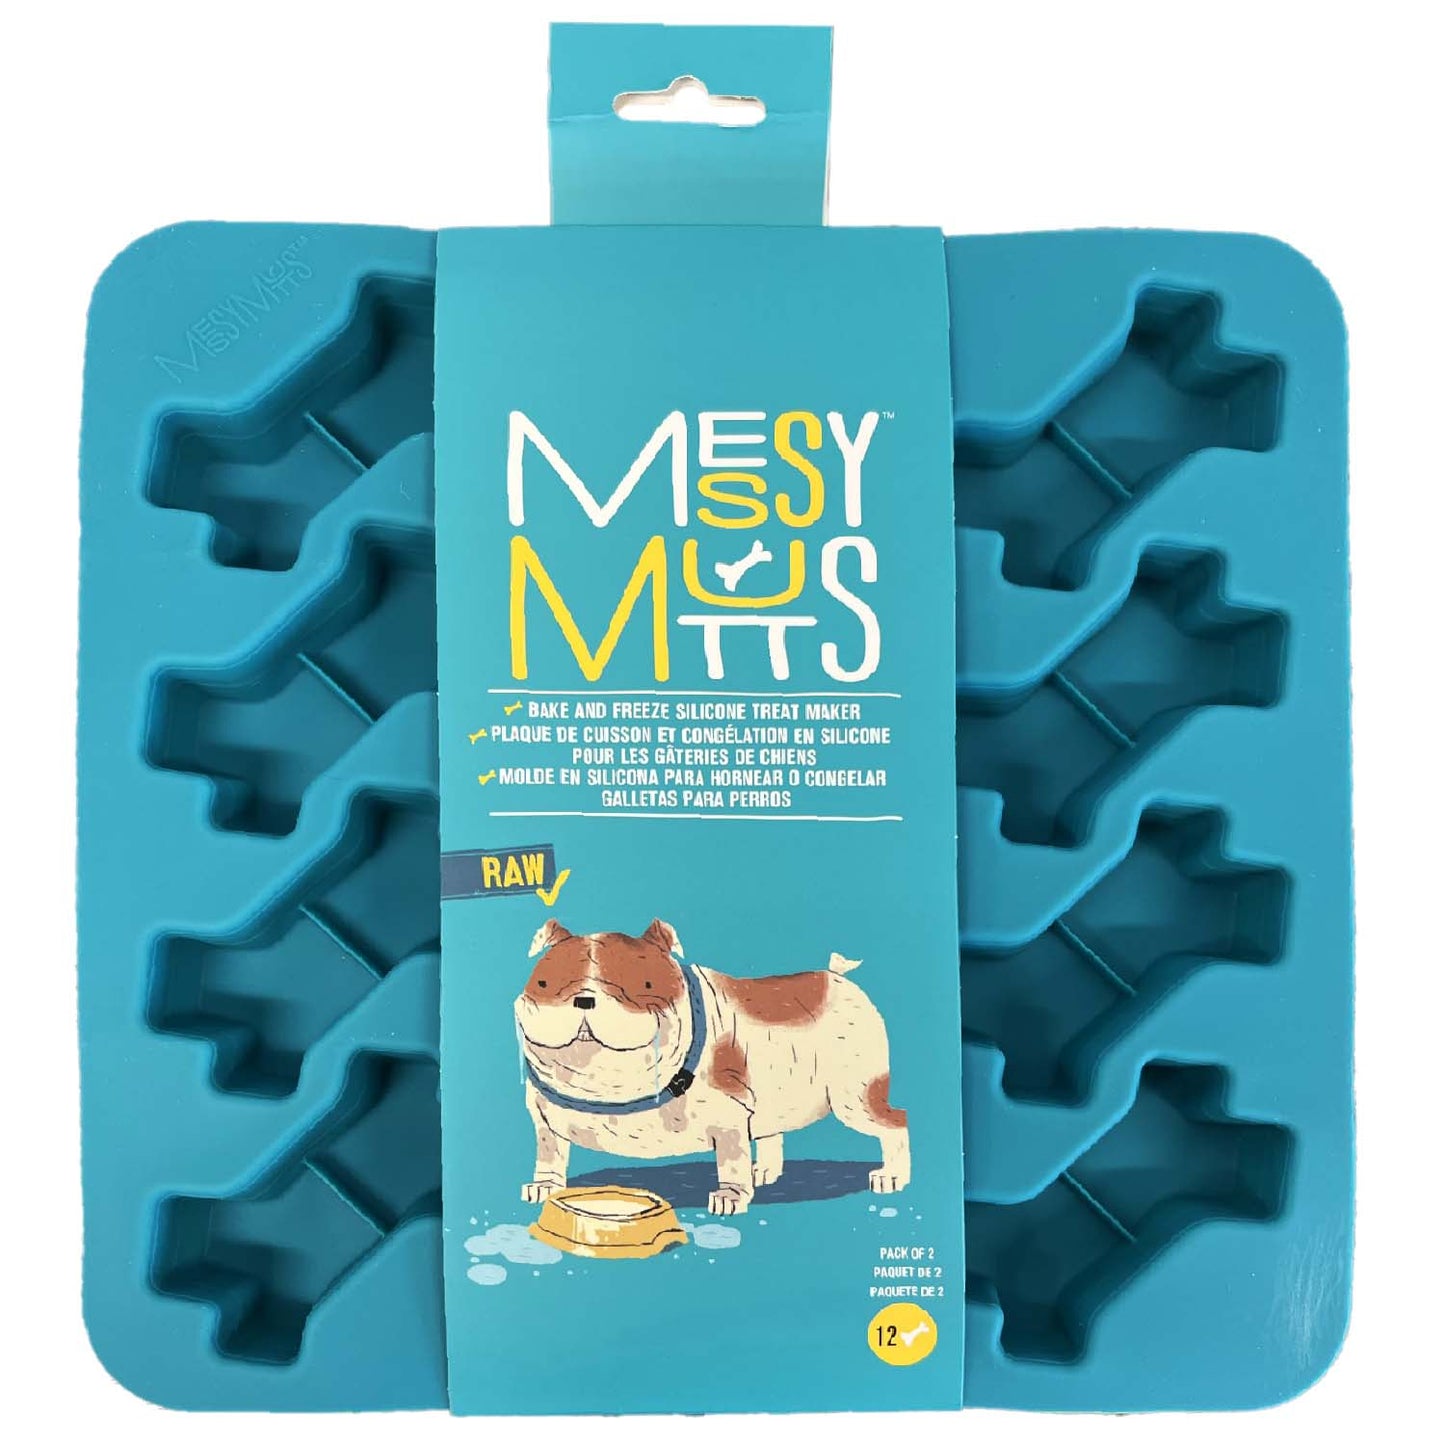 Messy Mutts Silicone Treat Makers, 2-pk